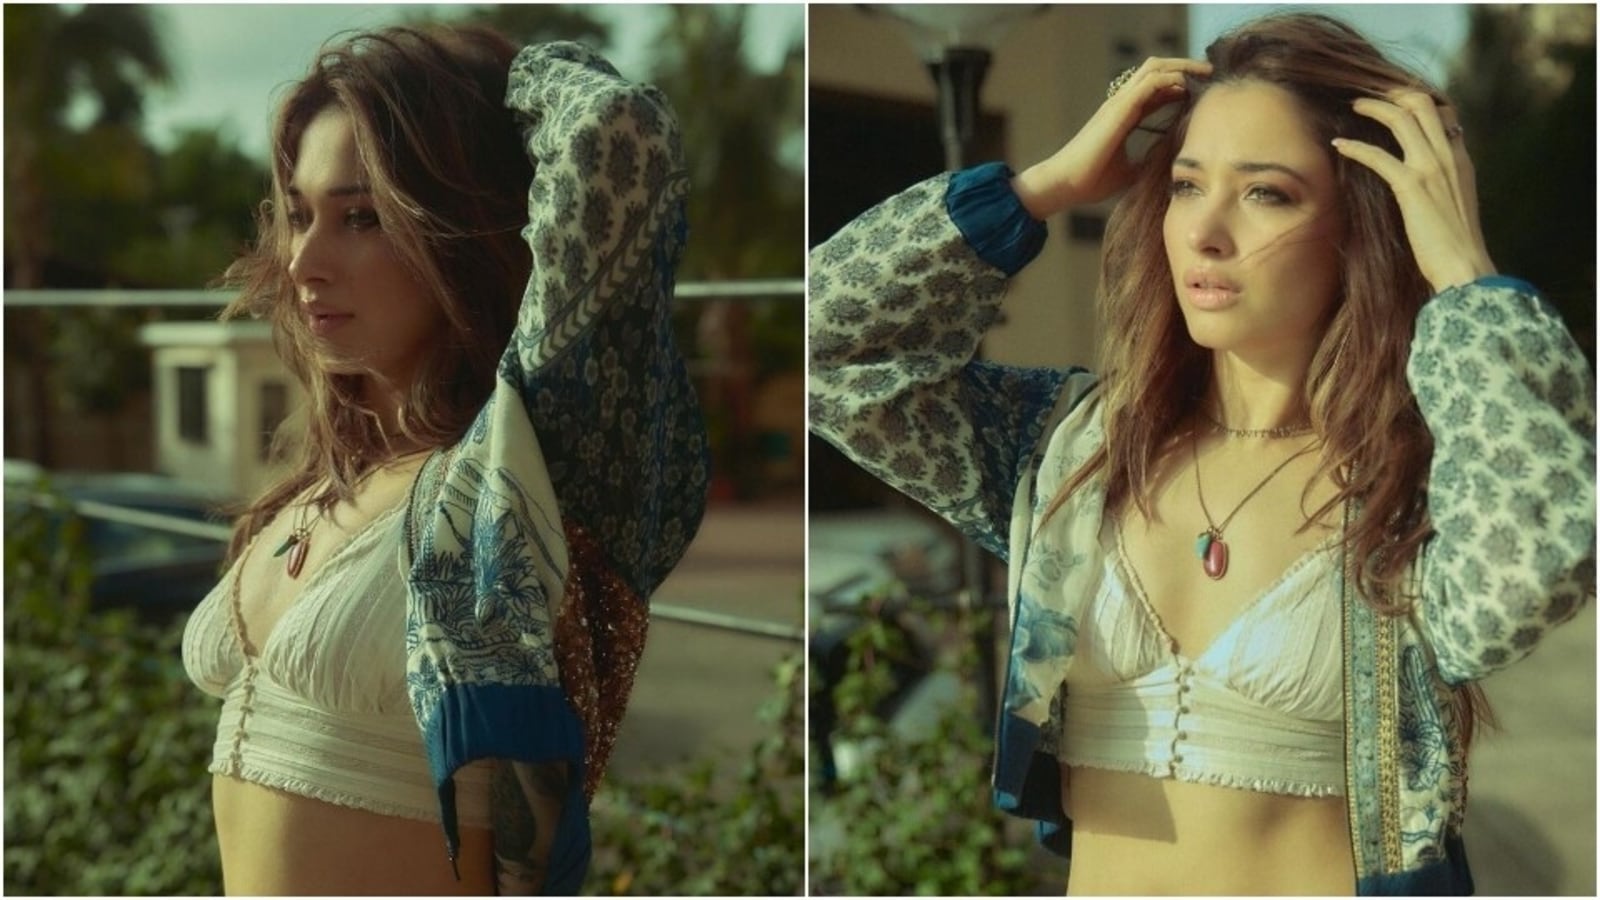 Xxx Video Thamana - Tamannaah Bhatia serves strong 70s vibes in Sabyasachi x H&M bralette and  denims | Fashion Trends - Hindustan Times